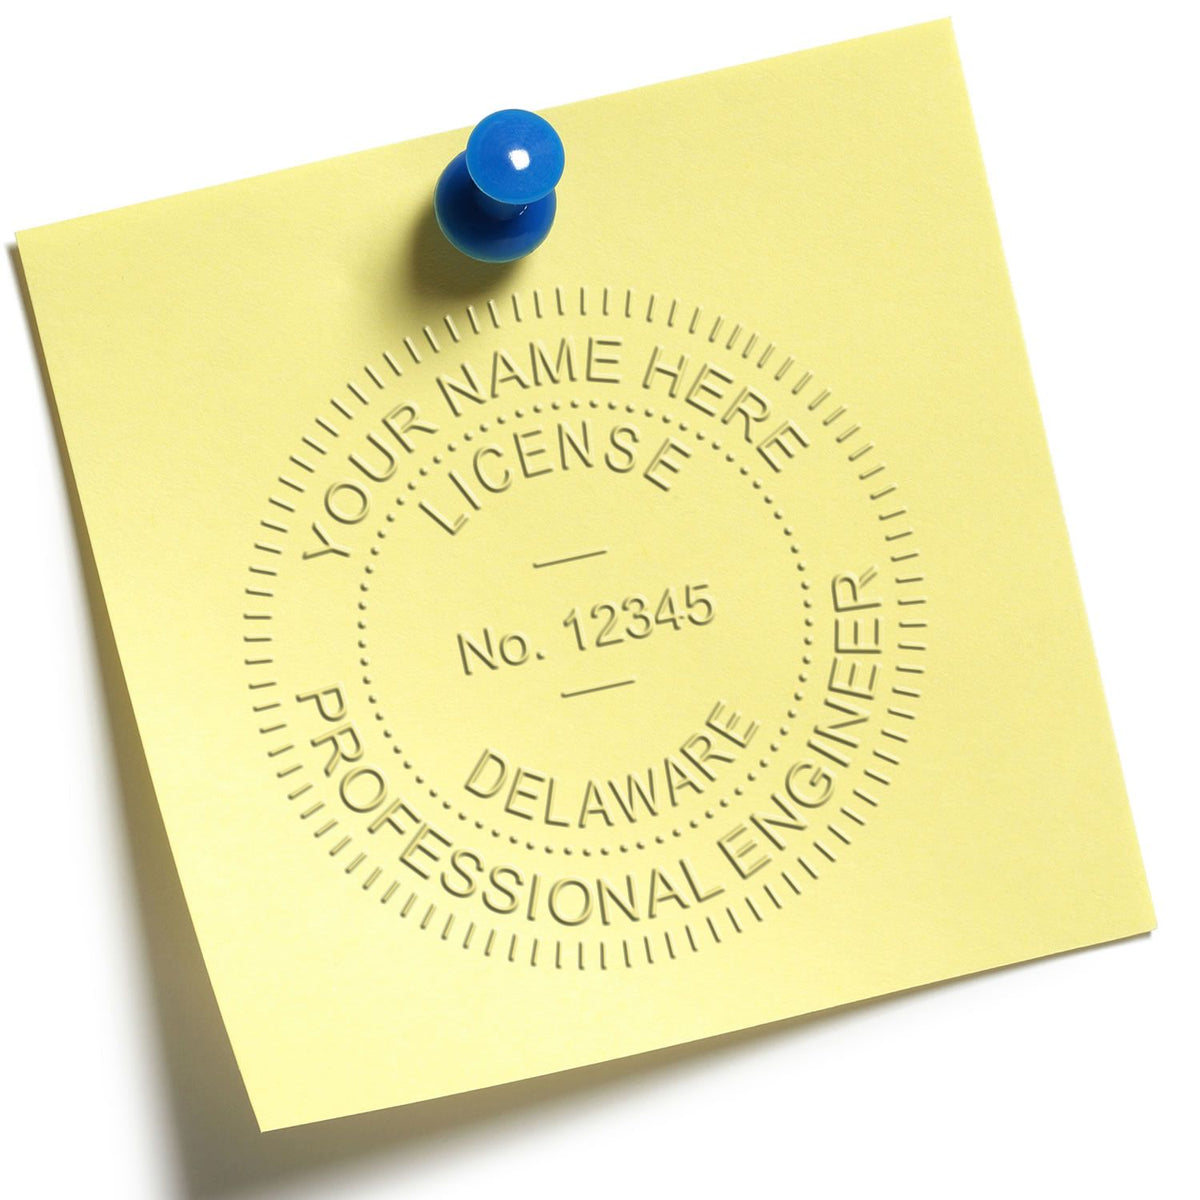 An alternative view of the Hybrid Delaware Engineer Seal stamped on a sheet of paper showing the image in use